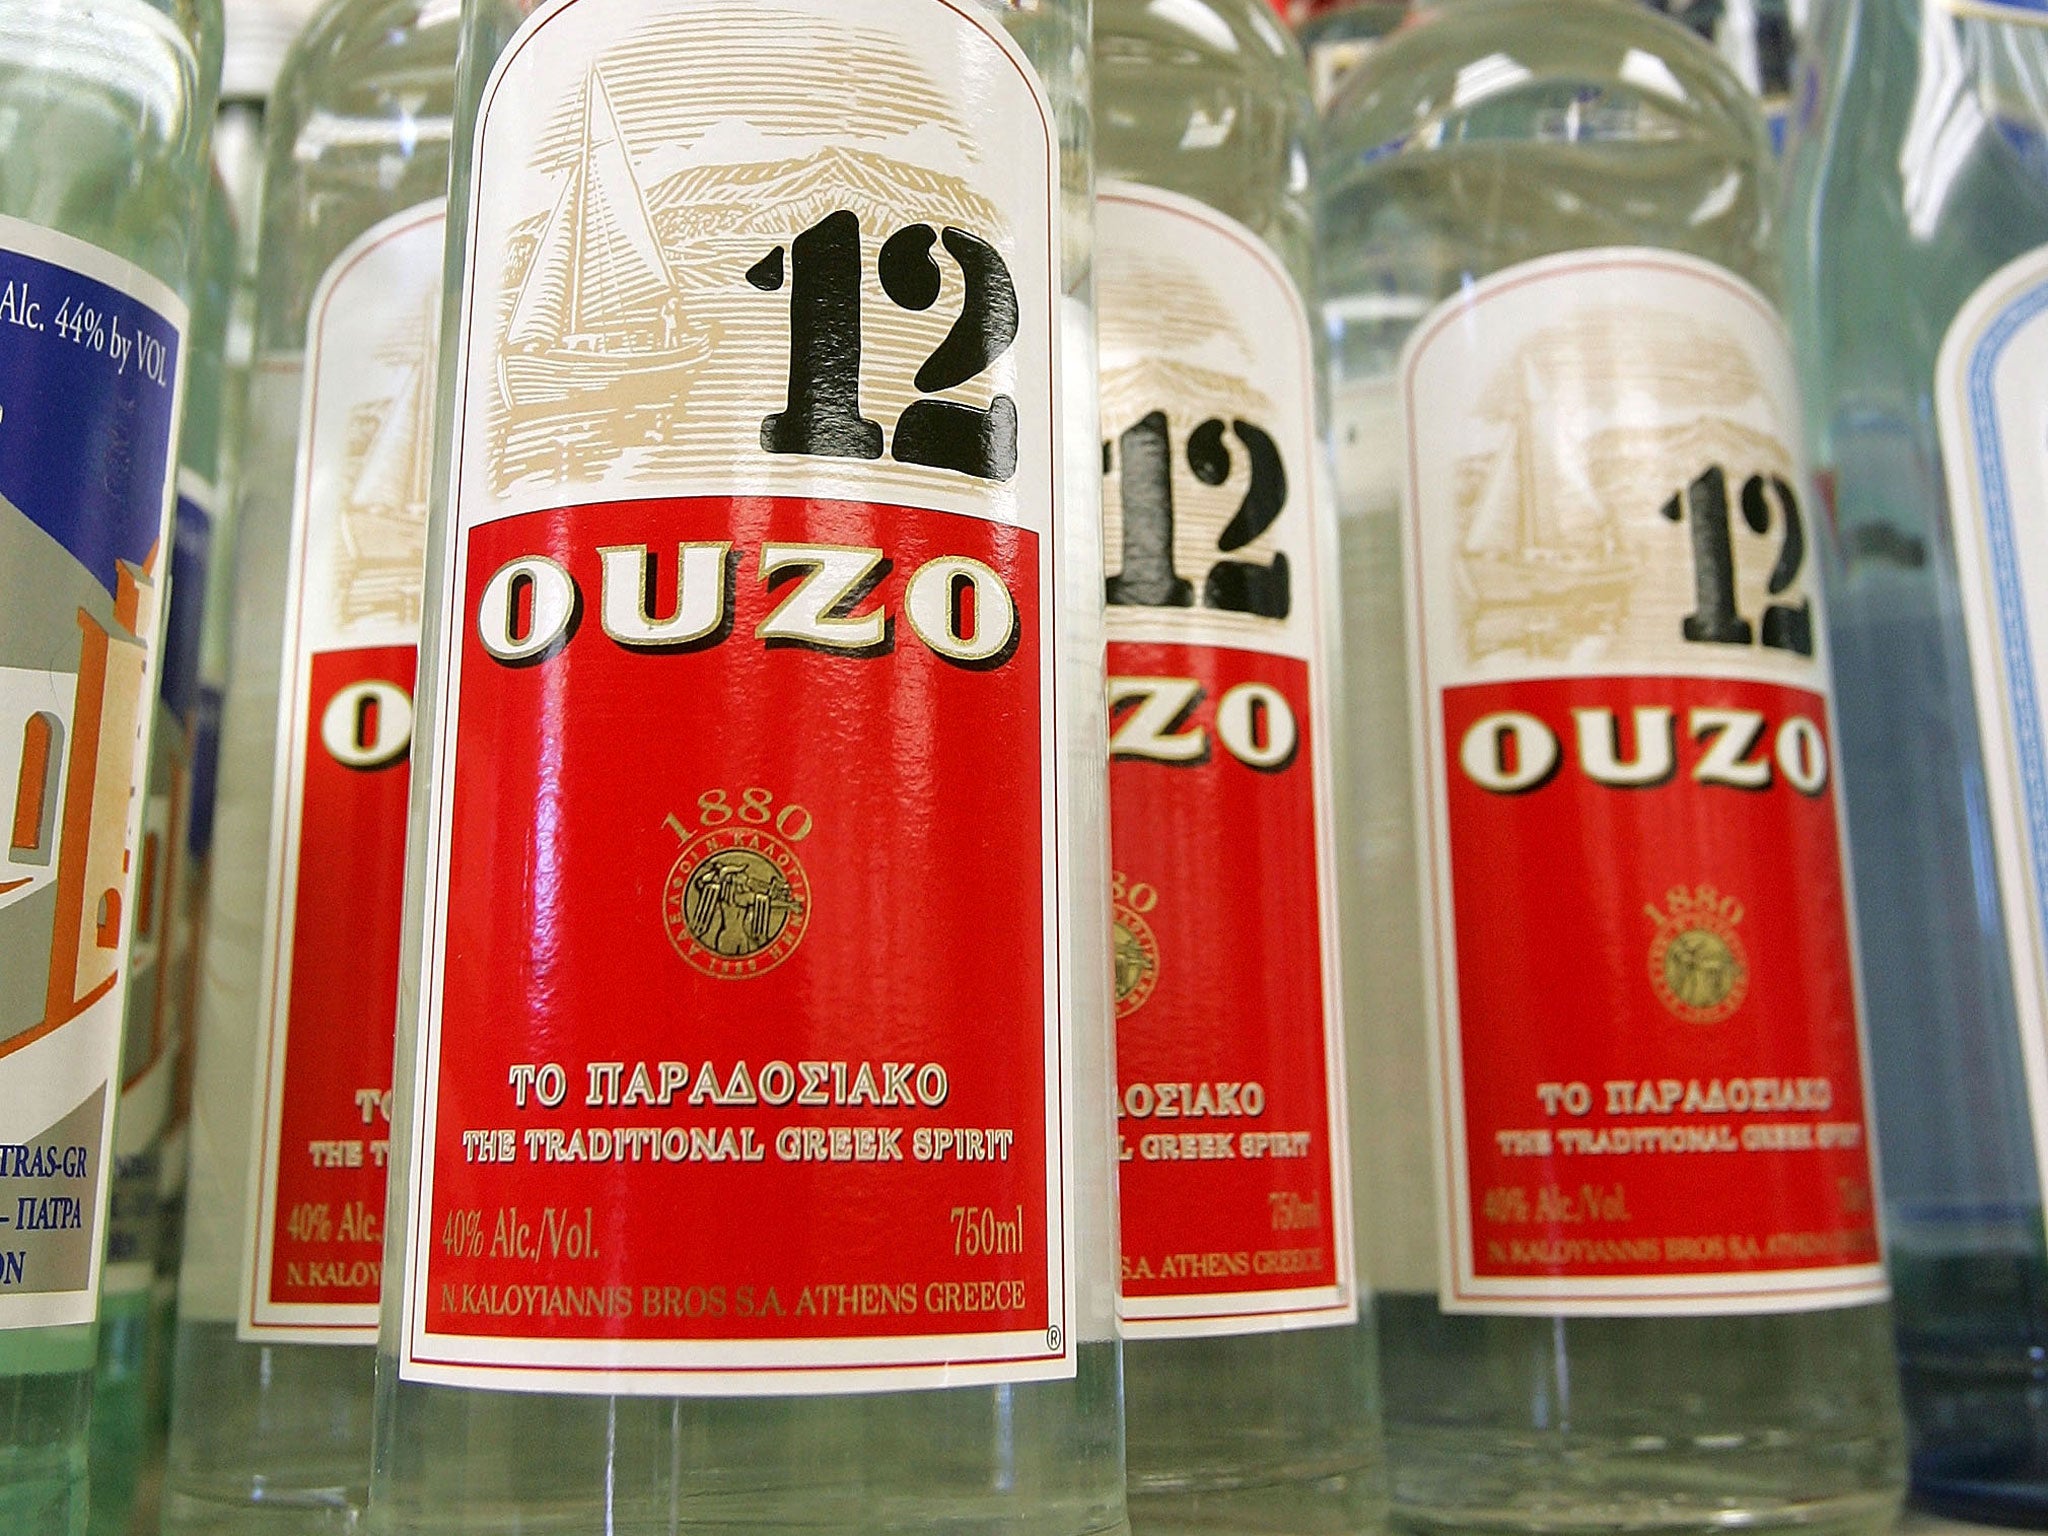 Ouzo dramatically loses appeal in northern climes